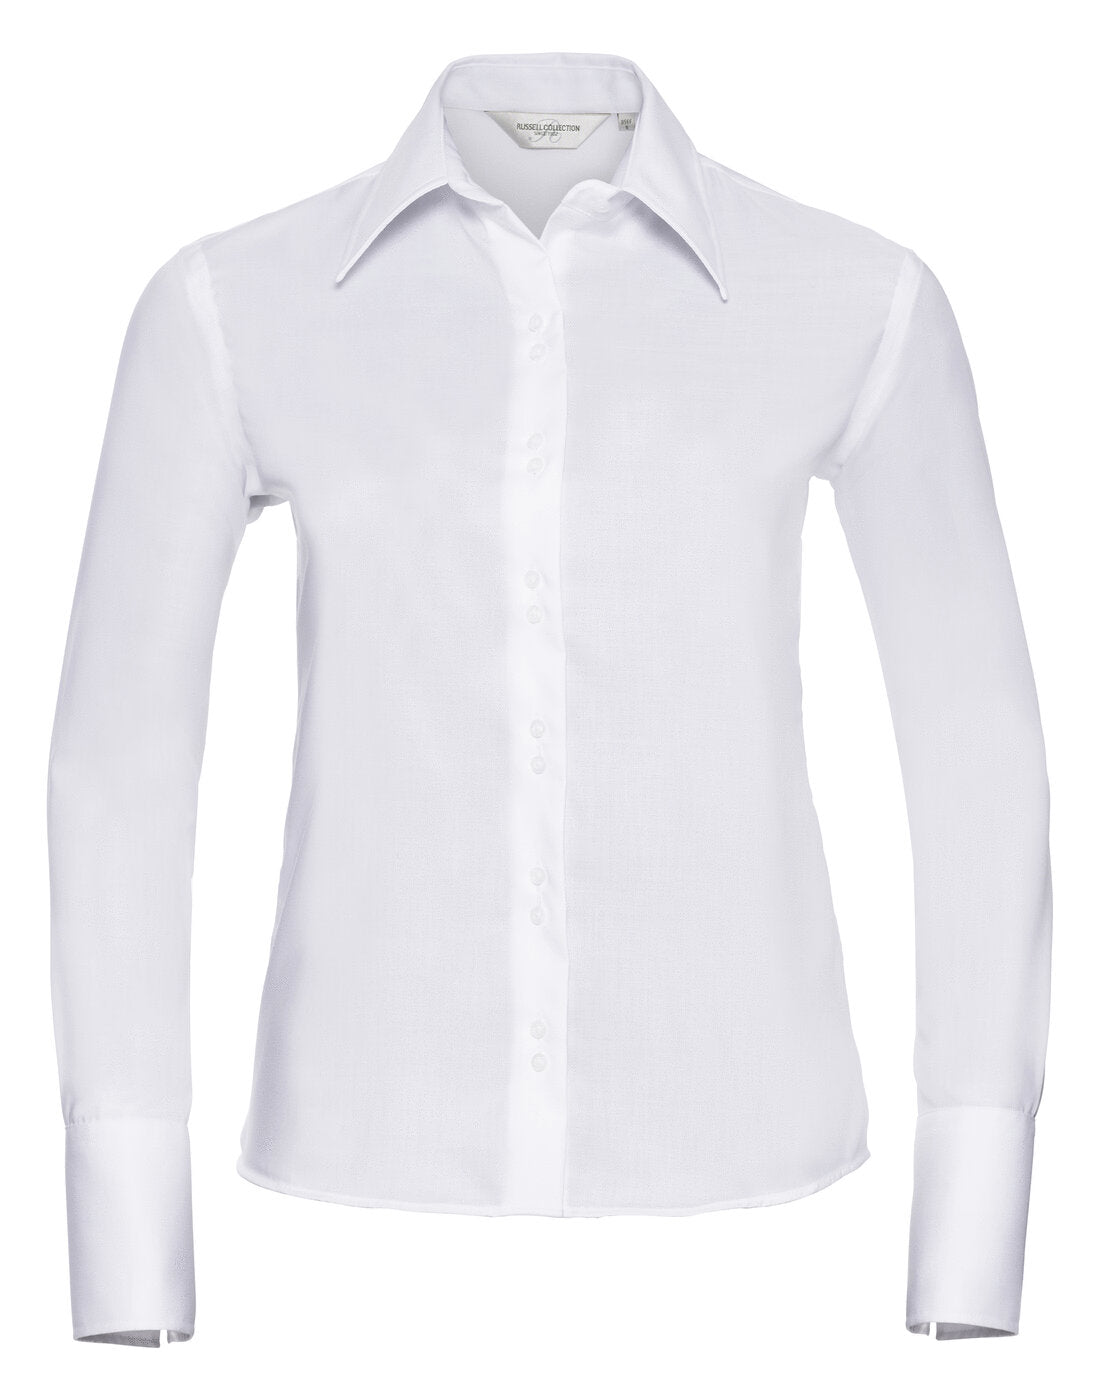 Russell Ladies Long Sleeve Ultimate Non-Iron Shirt White